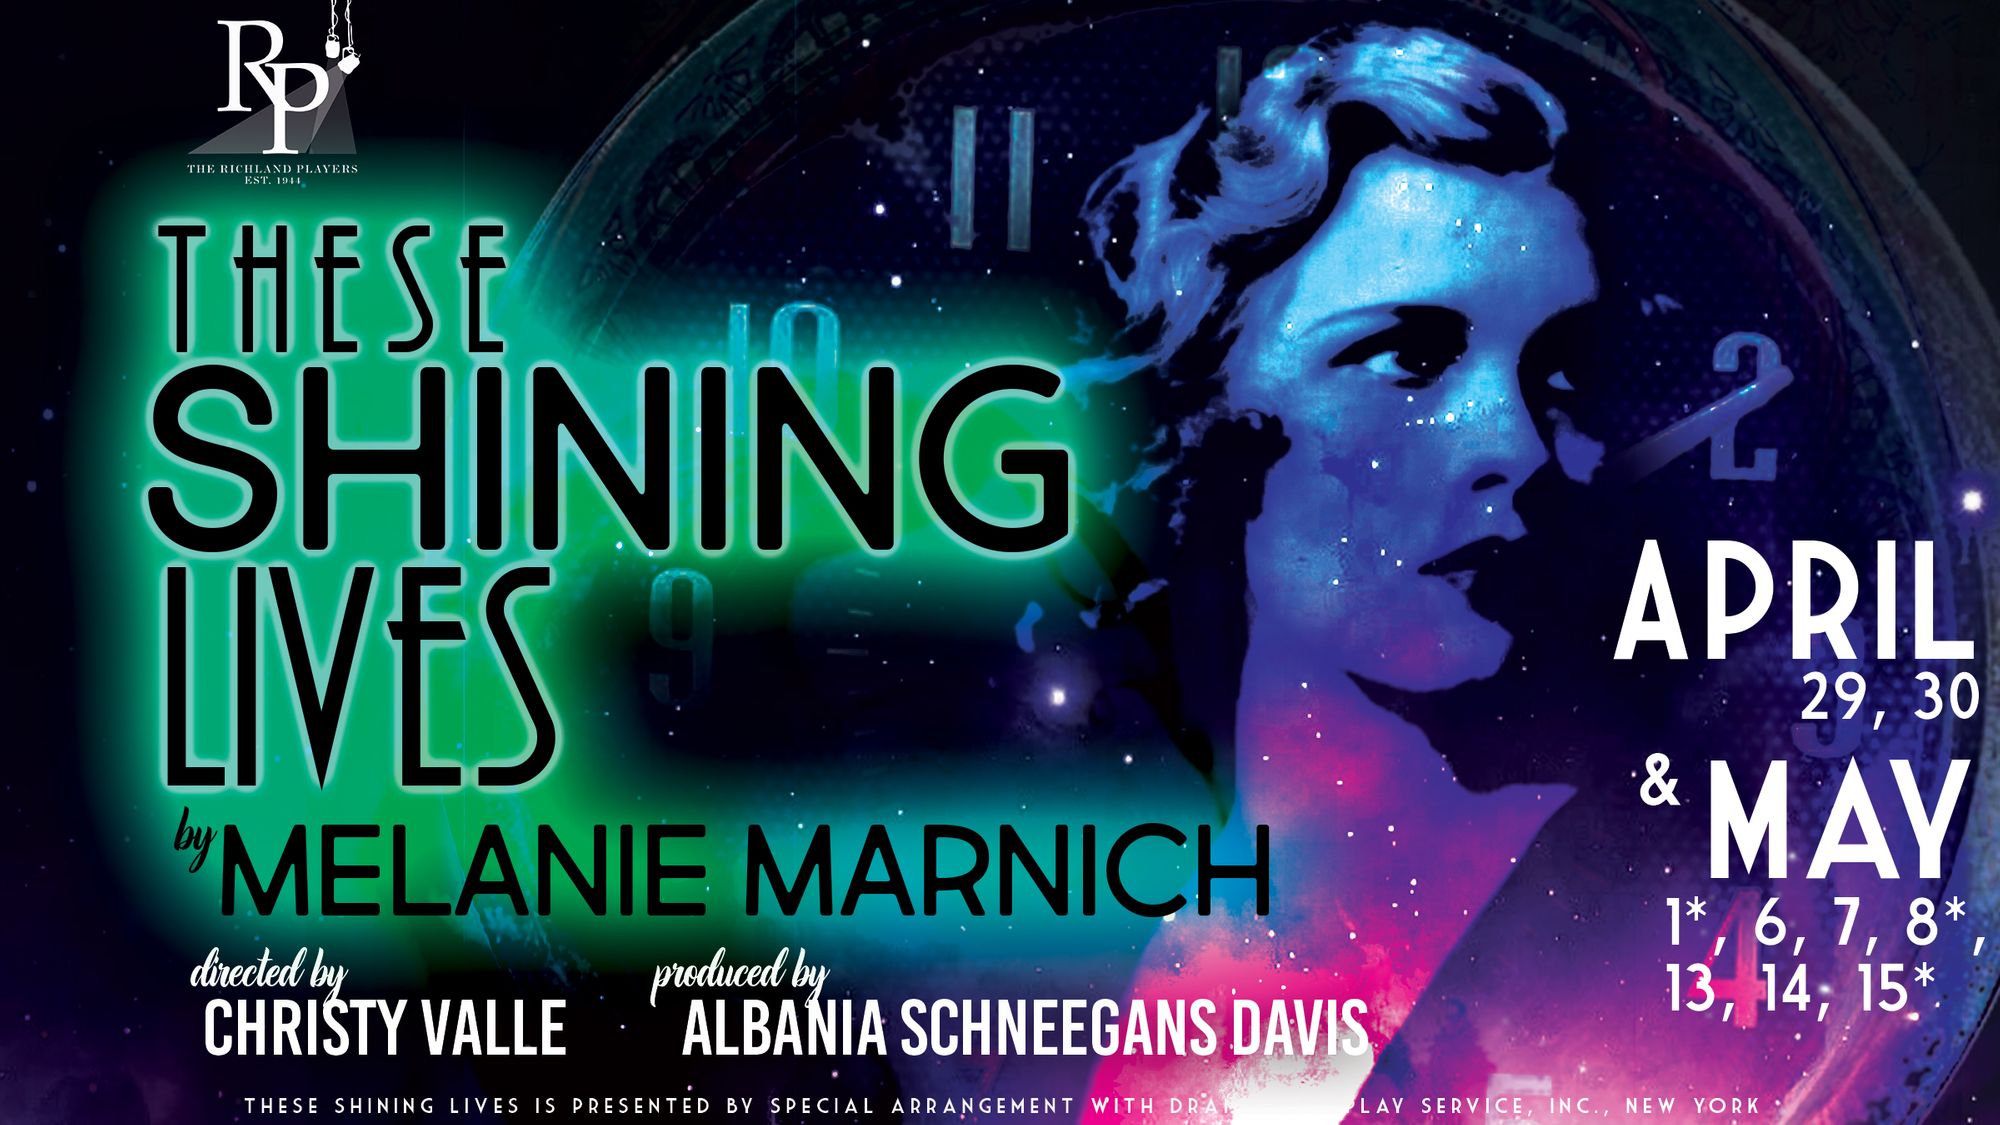 On Stage in May: These Shining Lives